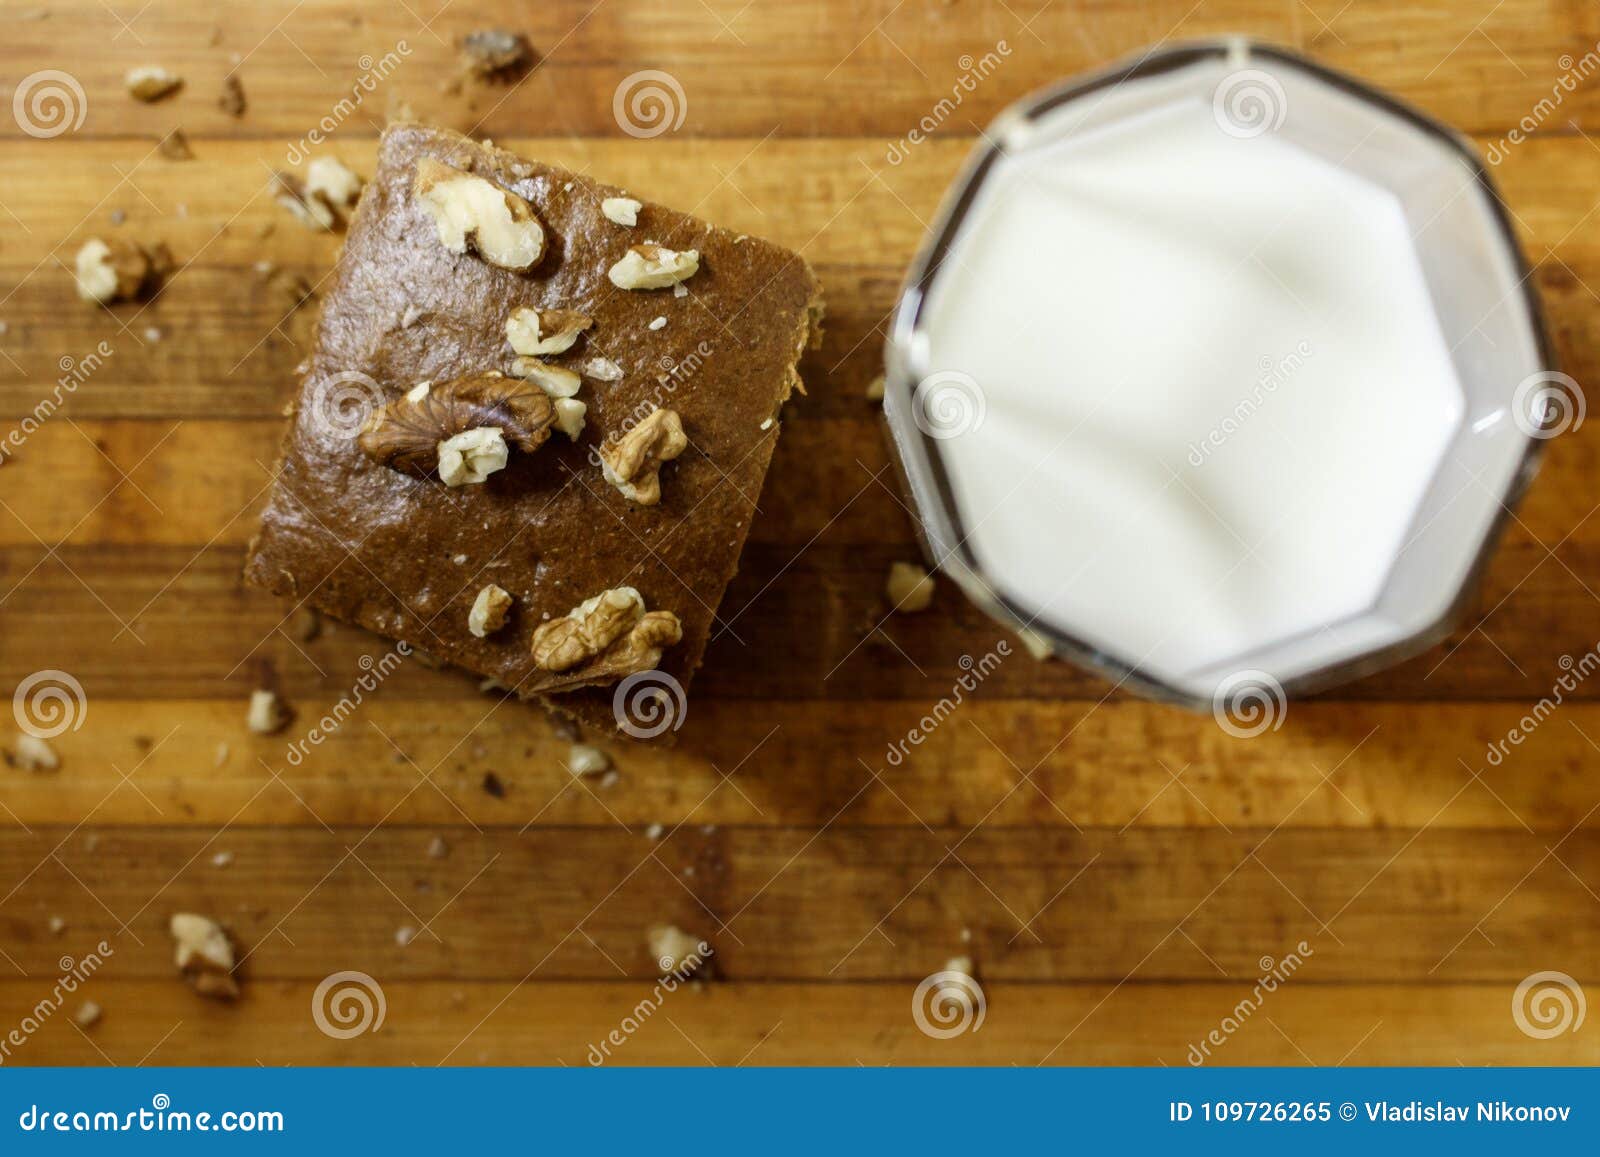 Banana Pie with a Glass of Milk on the Board Stock Image - Image of ...